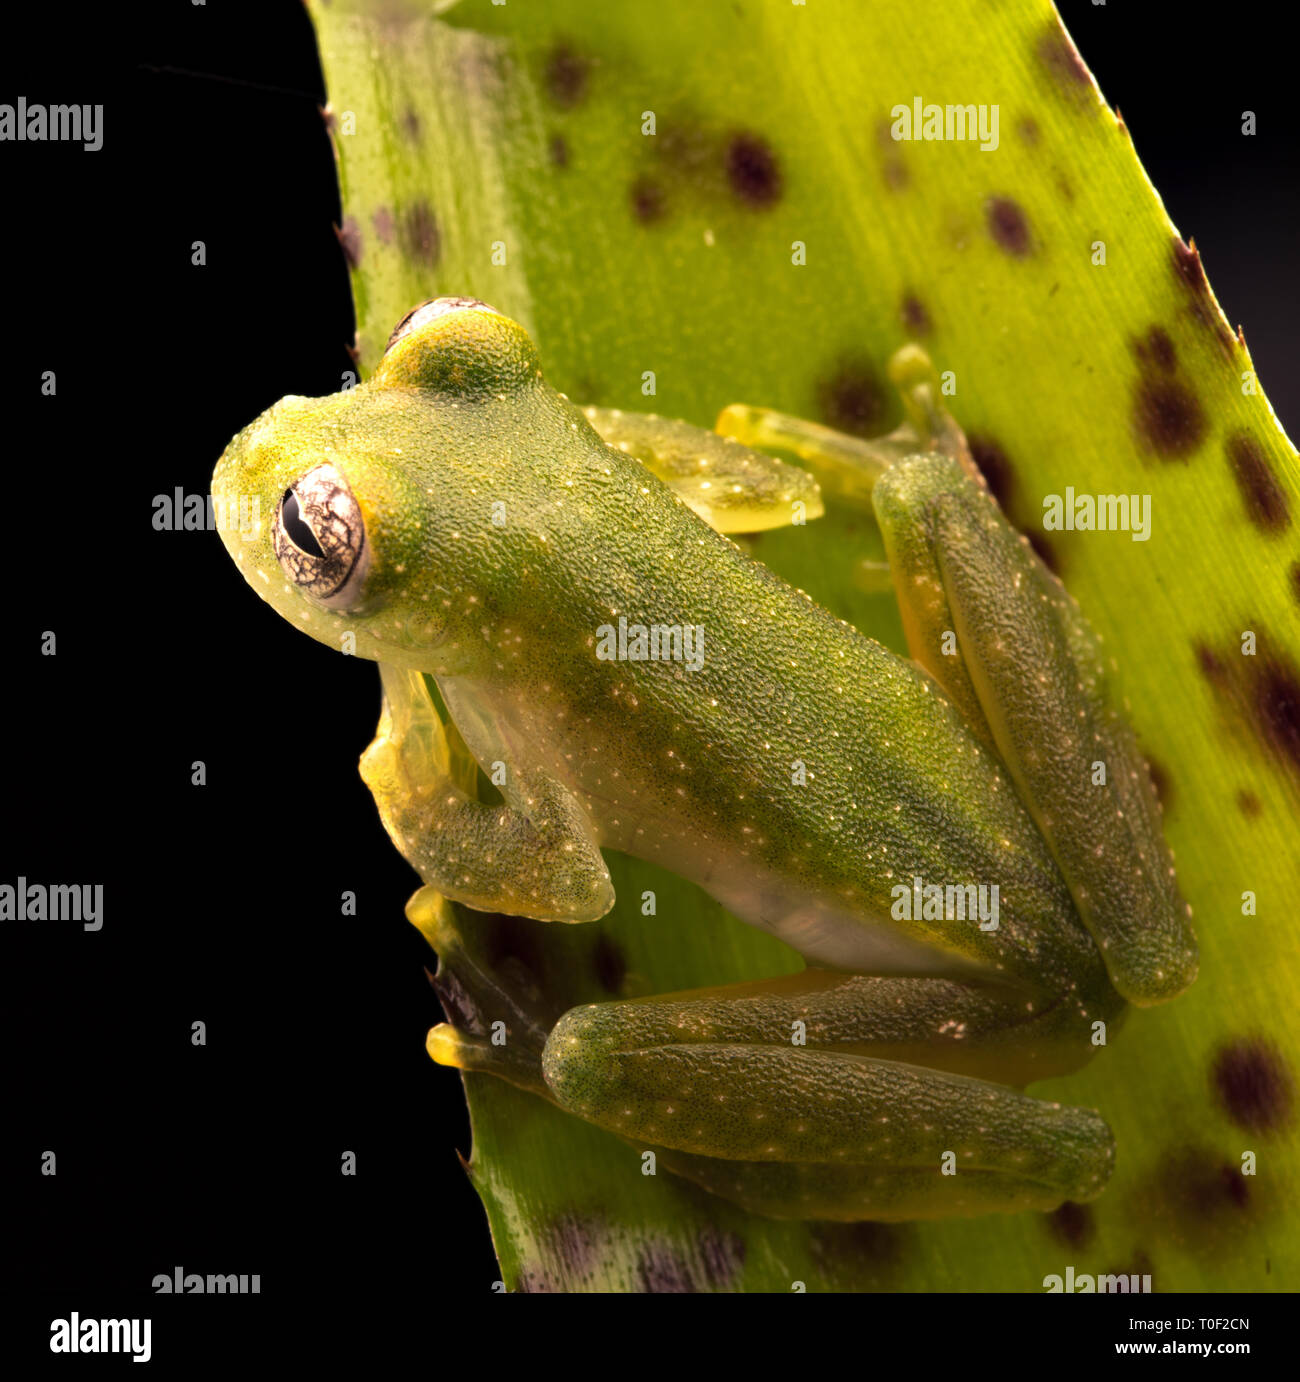 Tropical glass frog from the Amazon rain forest, Teratohyla pulverata. A beautiful nocturnal jungle animal. Stock Photo